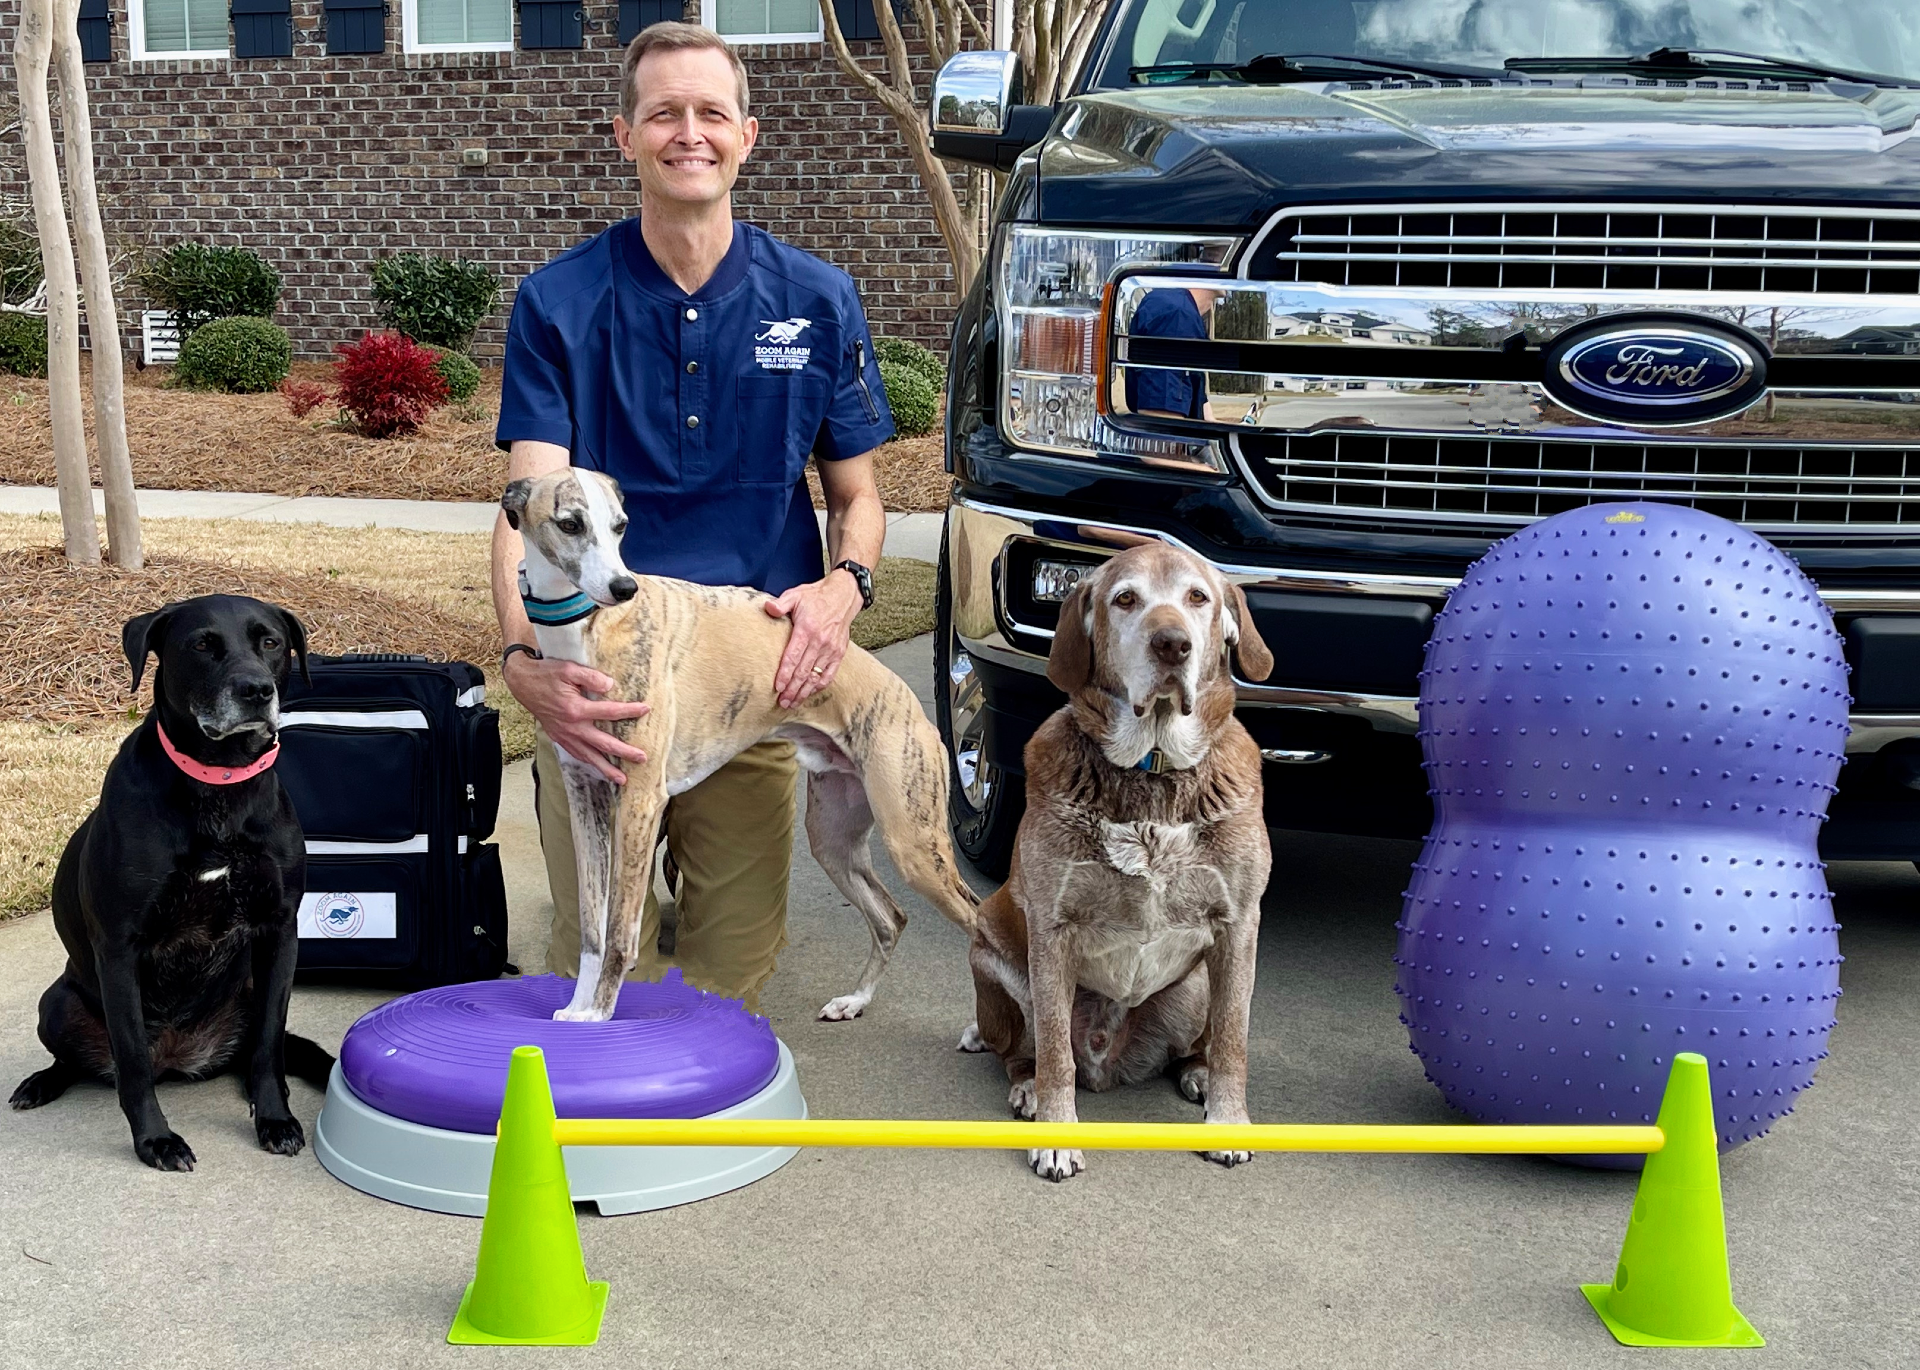 Male veterinarian with brown hair kneeling beside a black Ford truck with brown and white Whippet, brown Lab Hound Mix, and black lab mix. Purple therapy balls, green cones and cavaletti pole